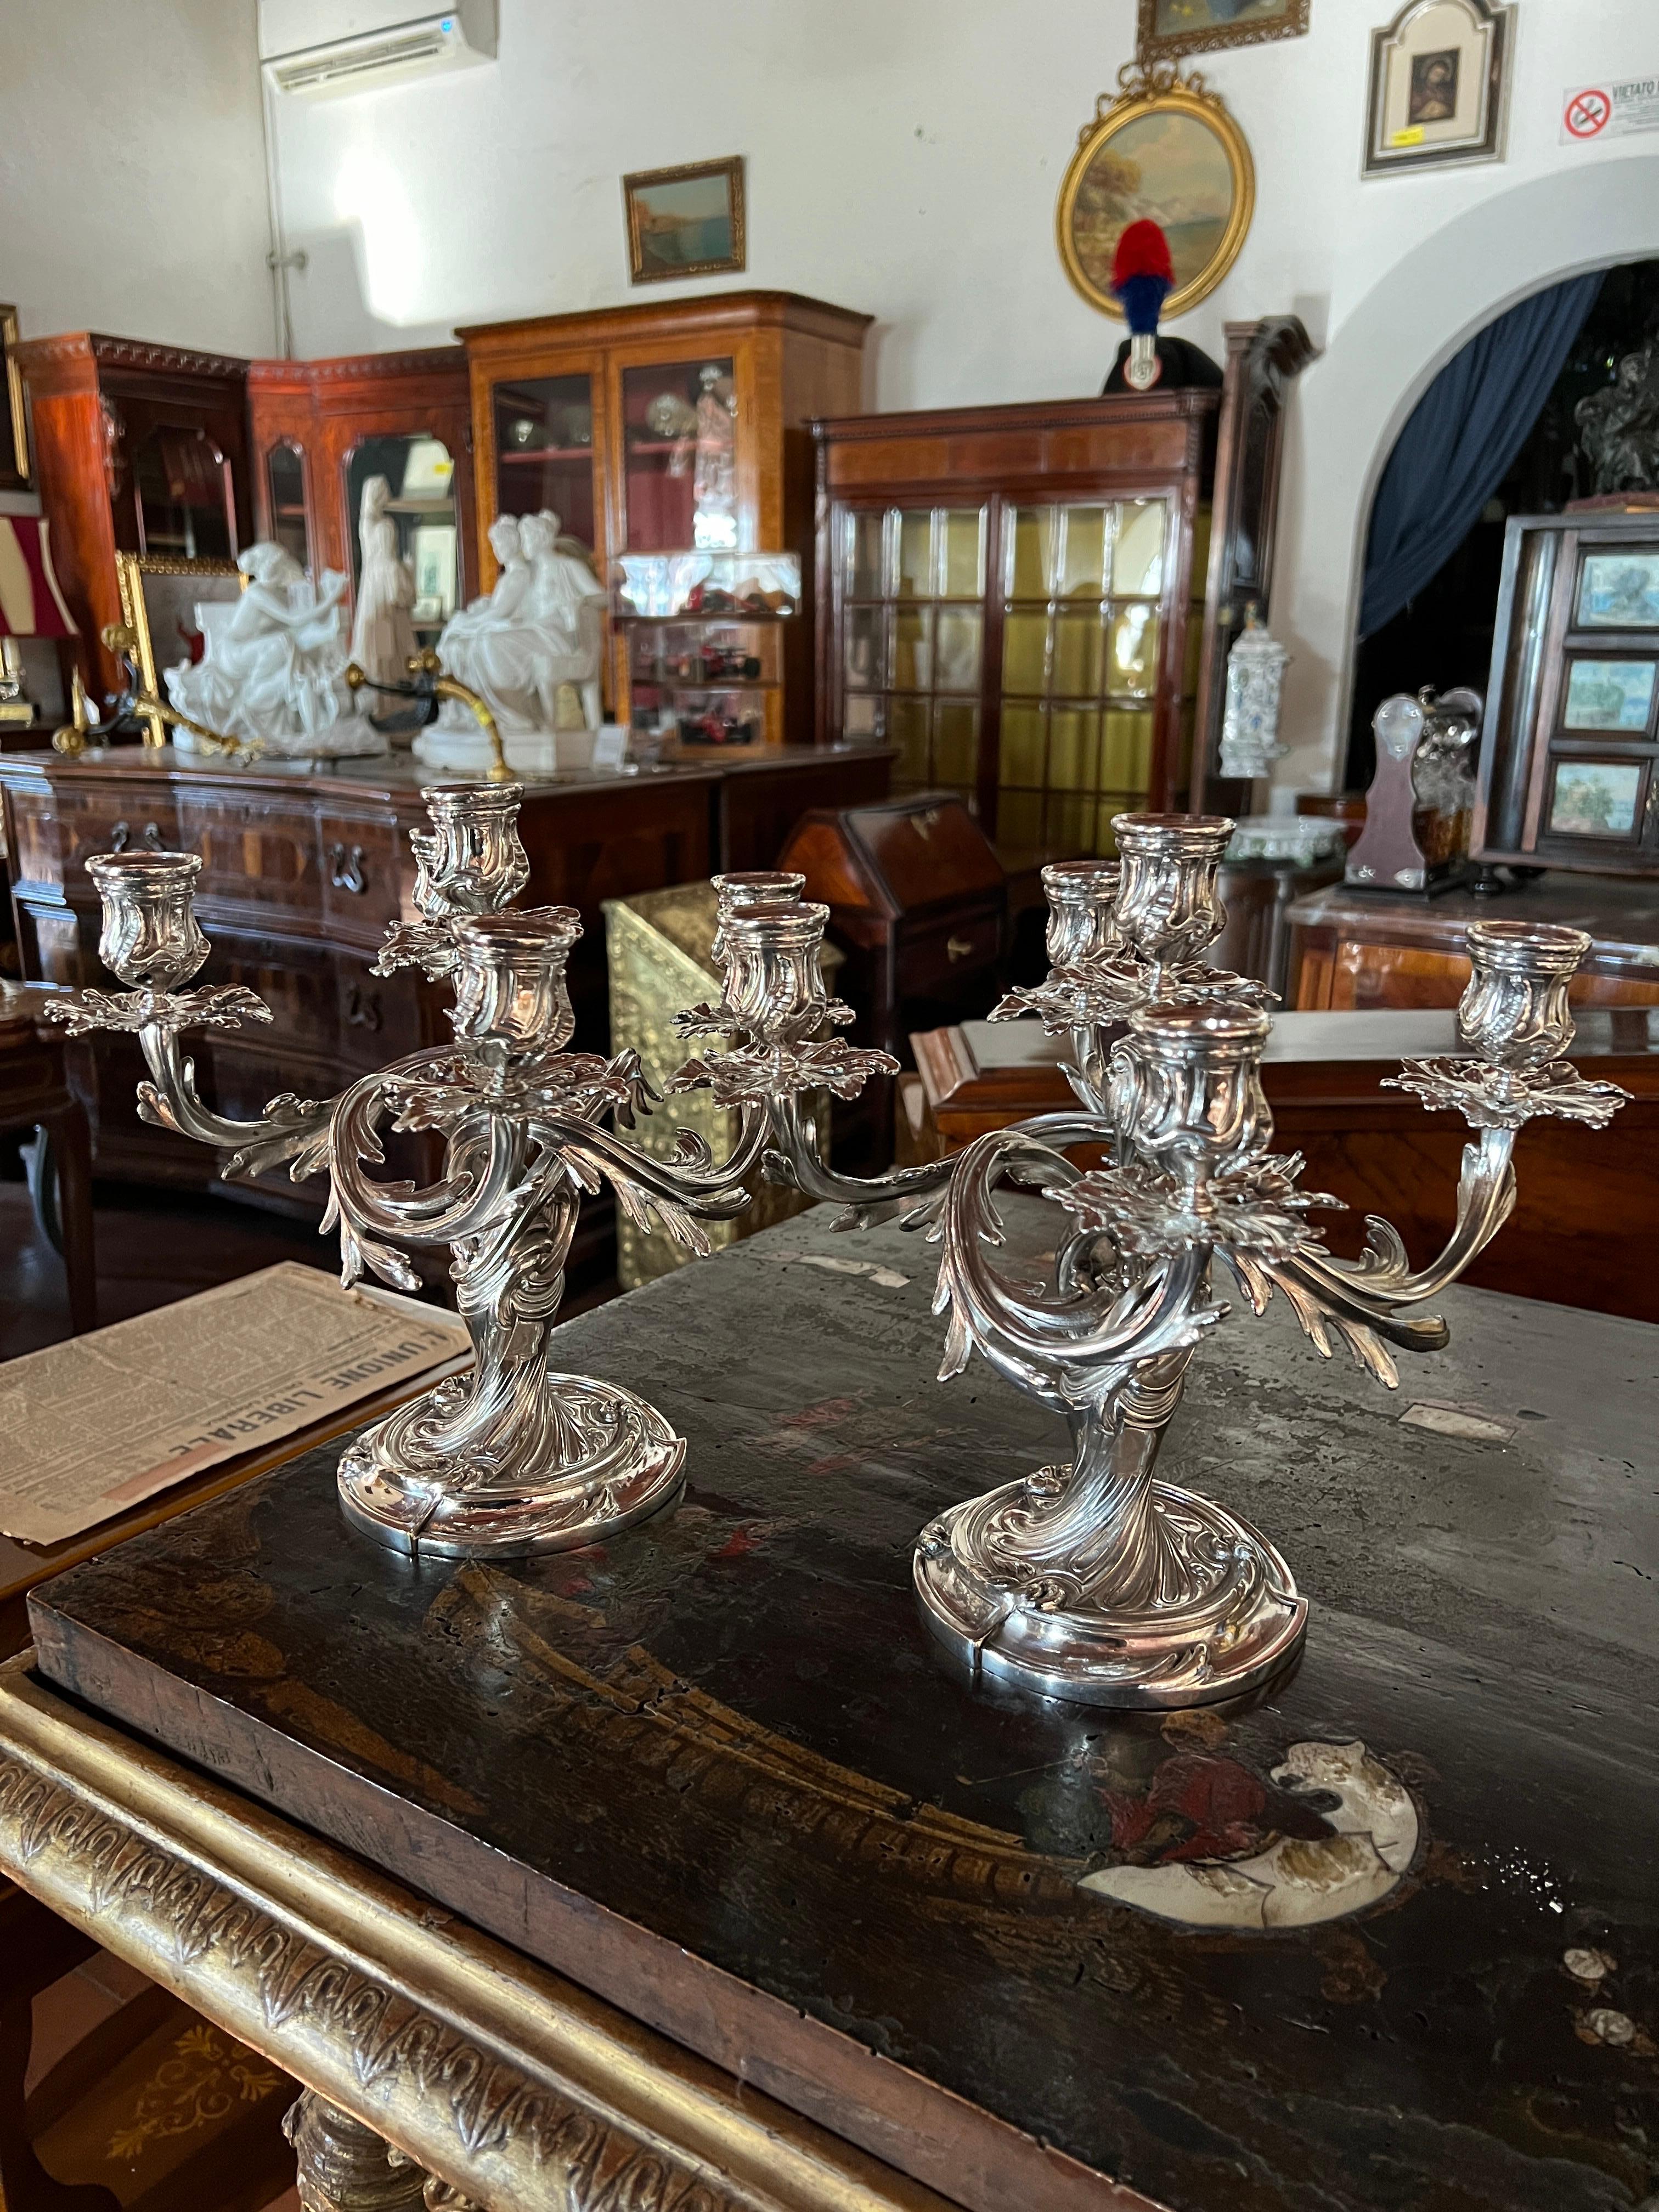 Fantastic Pair of Candelabras signed Christofle, first years of XX century,finely wrought , the structure looks like a moving plant that wraps around itself, 5 arms, initialed in the bottom with the Christofle symbol and serial. In silver-plated